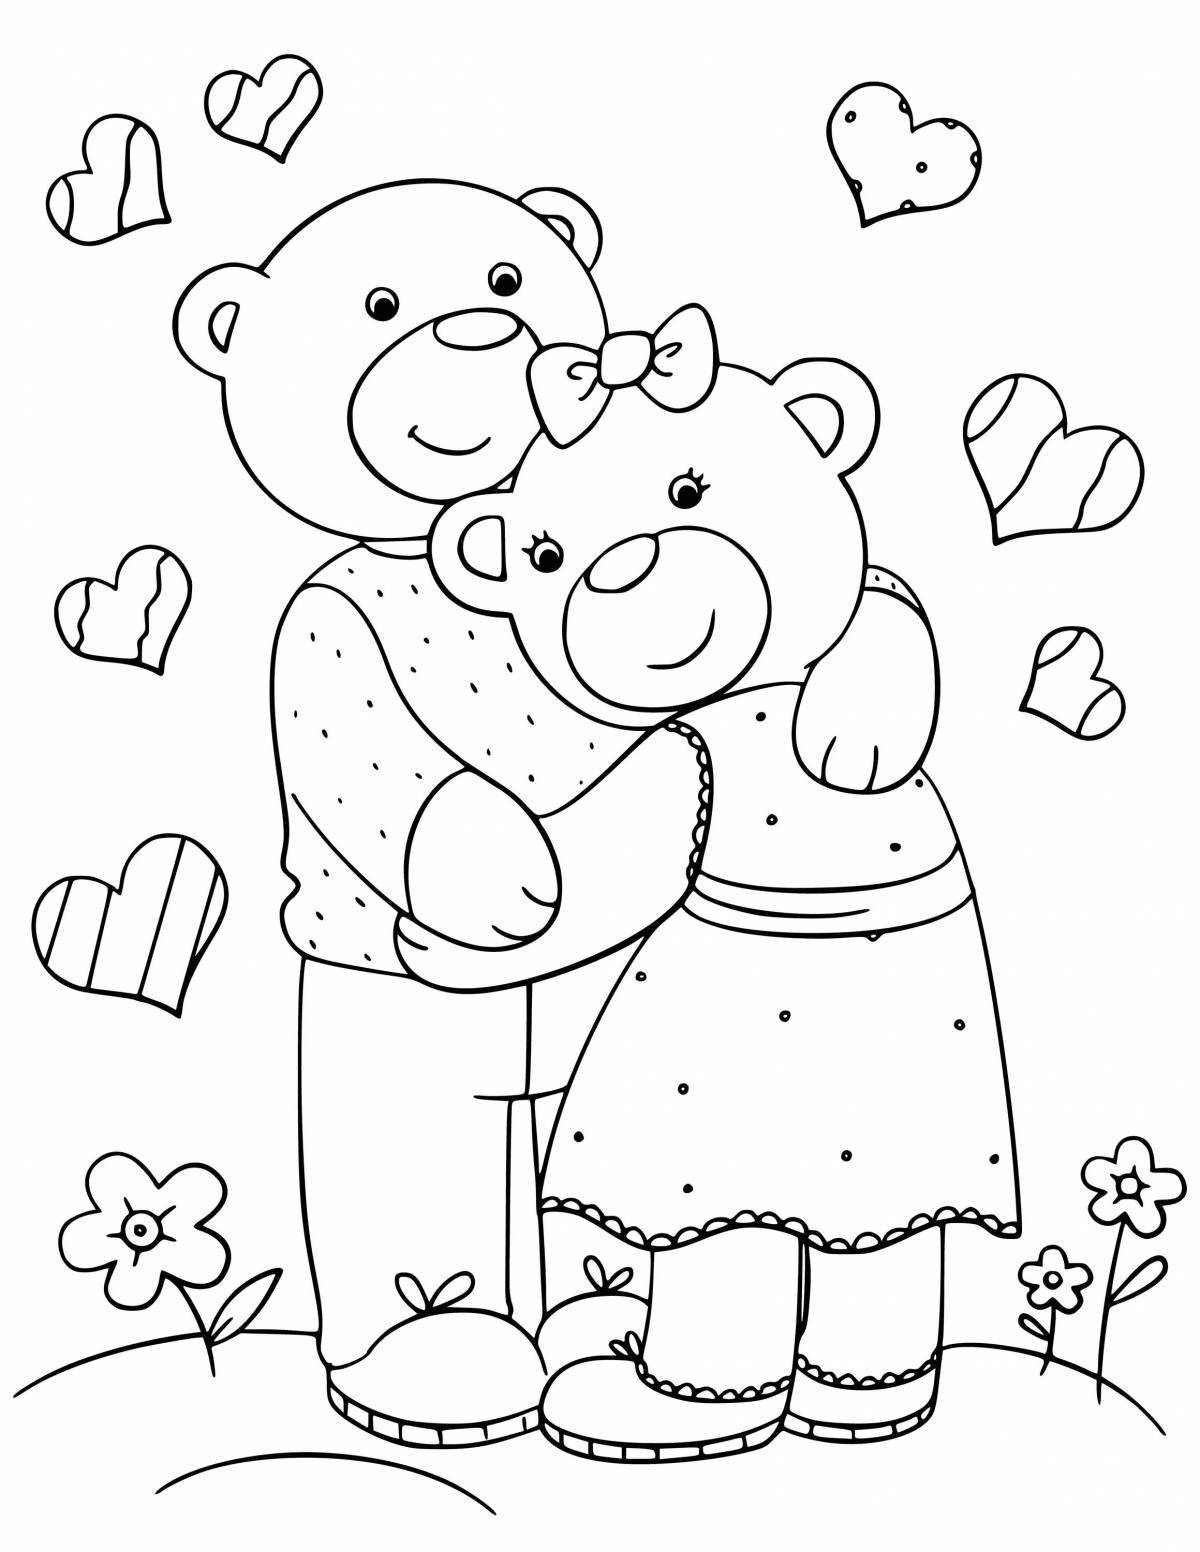 Playtime bear family coloring book